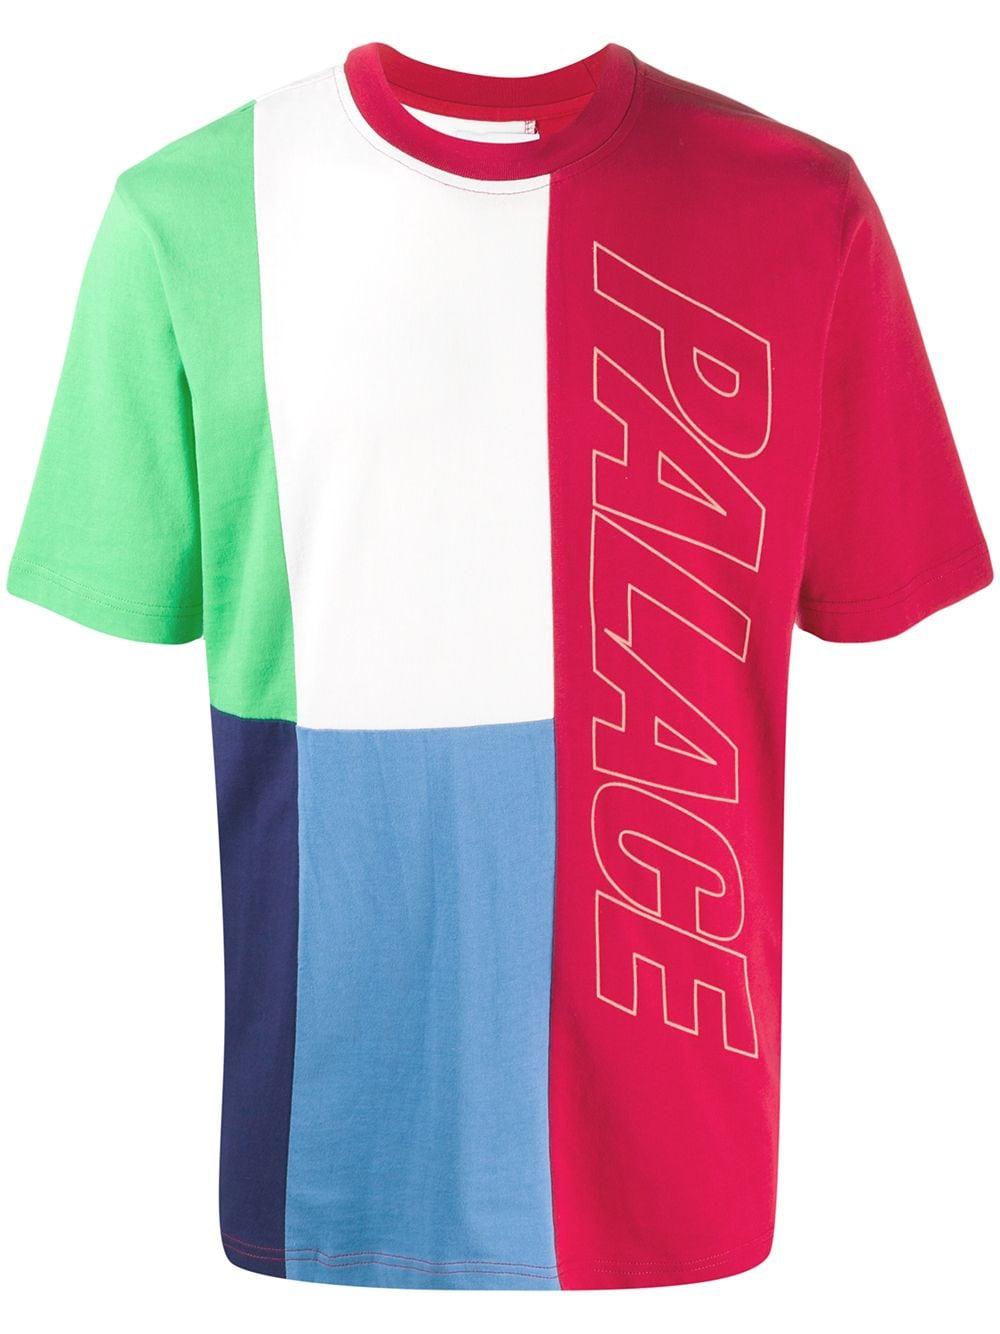 Palace Cotton Flaggin Colour Block T-shirt in Red for Men - Lyst